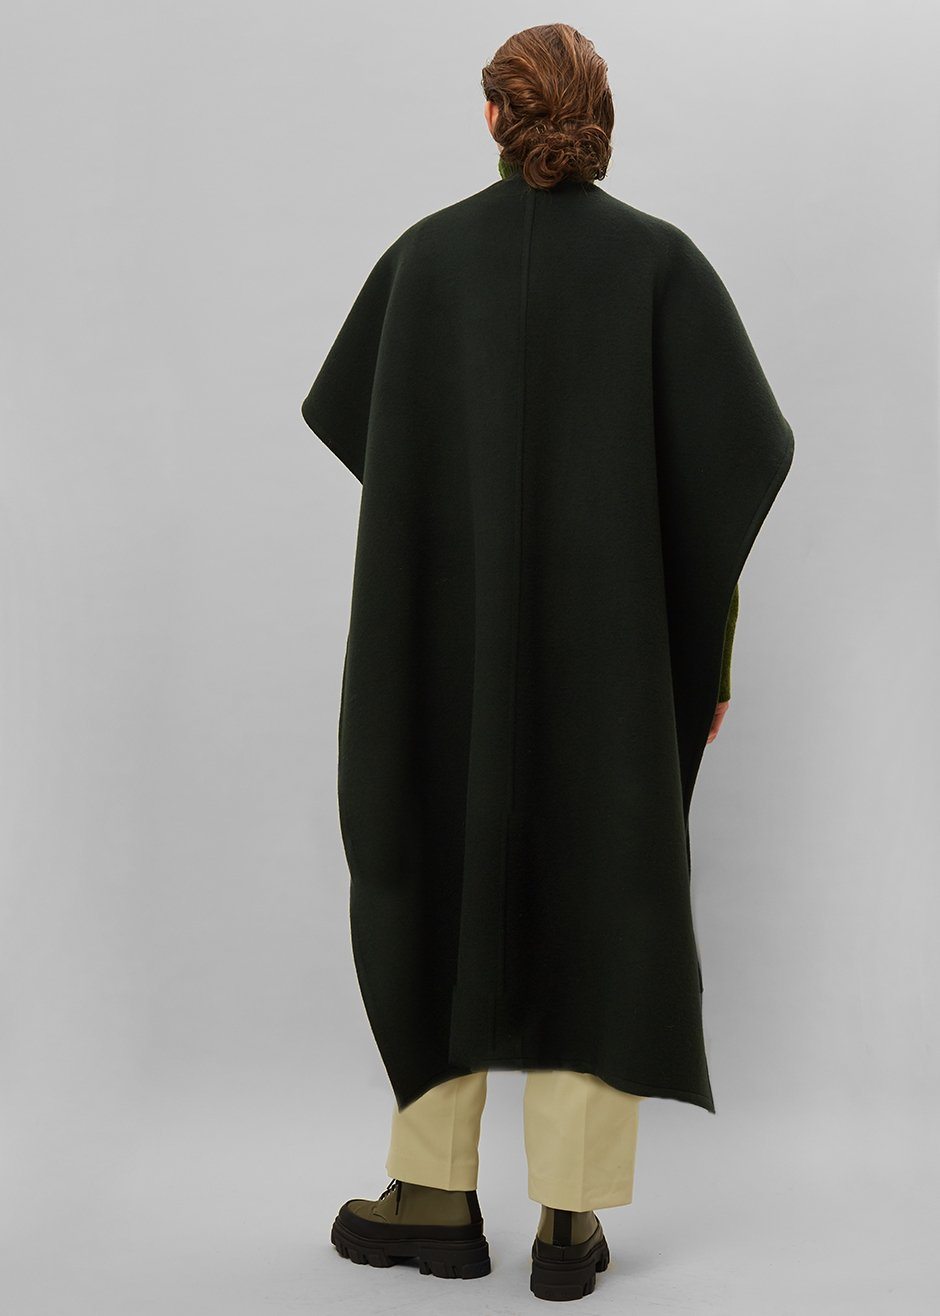 Verina Cape - Forest Green - 8